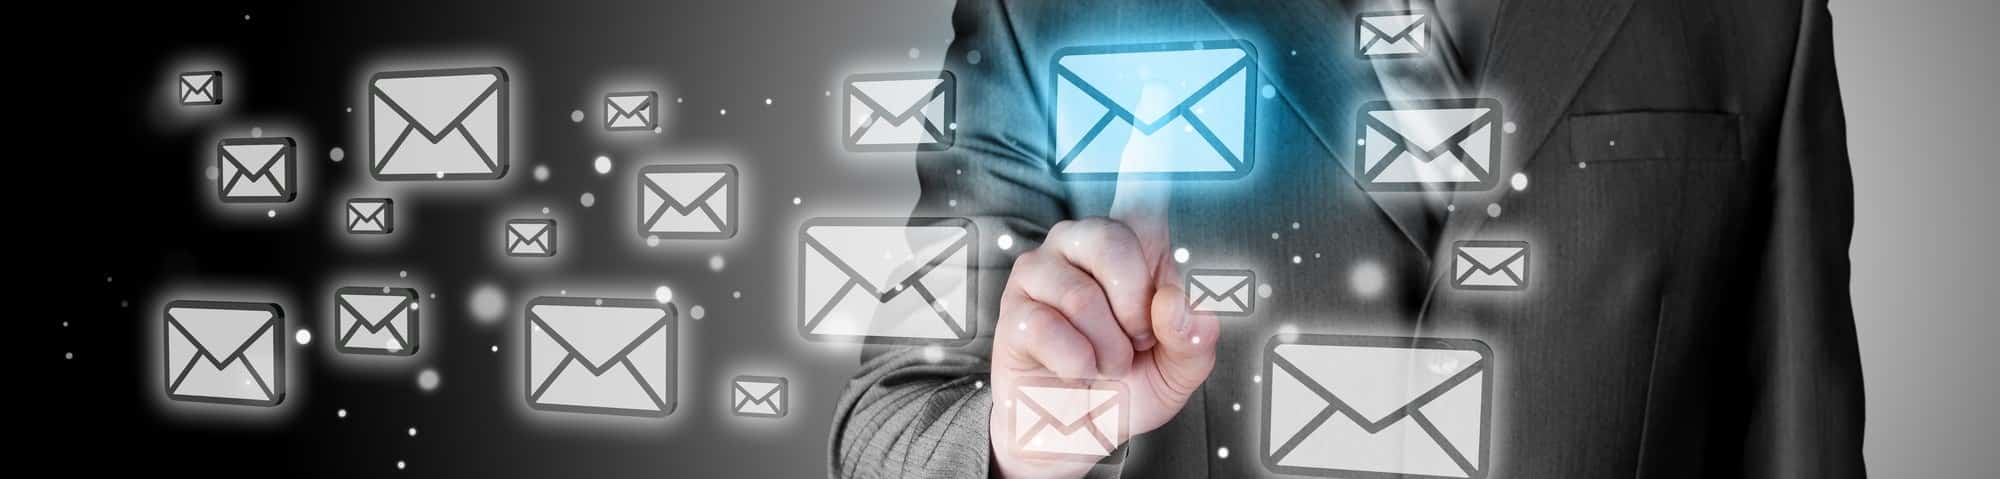 5 Important Types of Emails You Should Be Sending To Your Subscribers